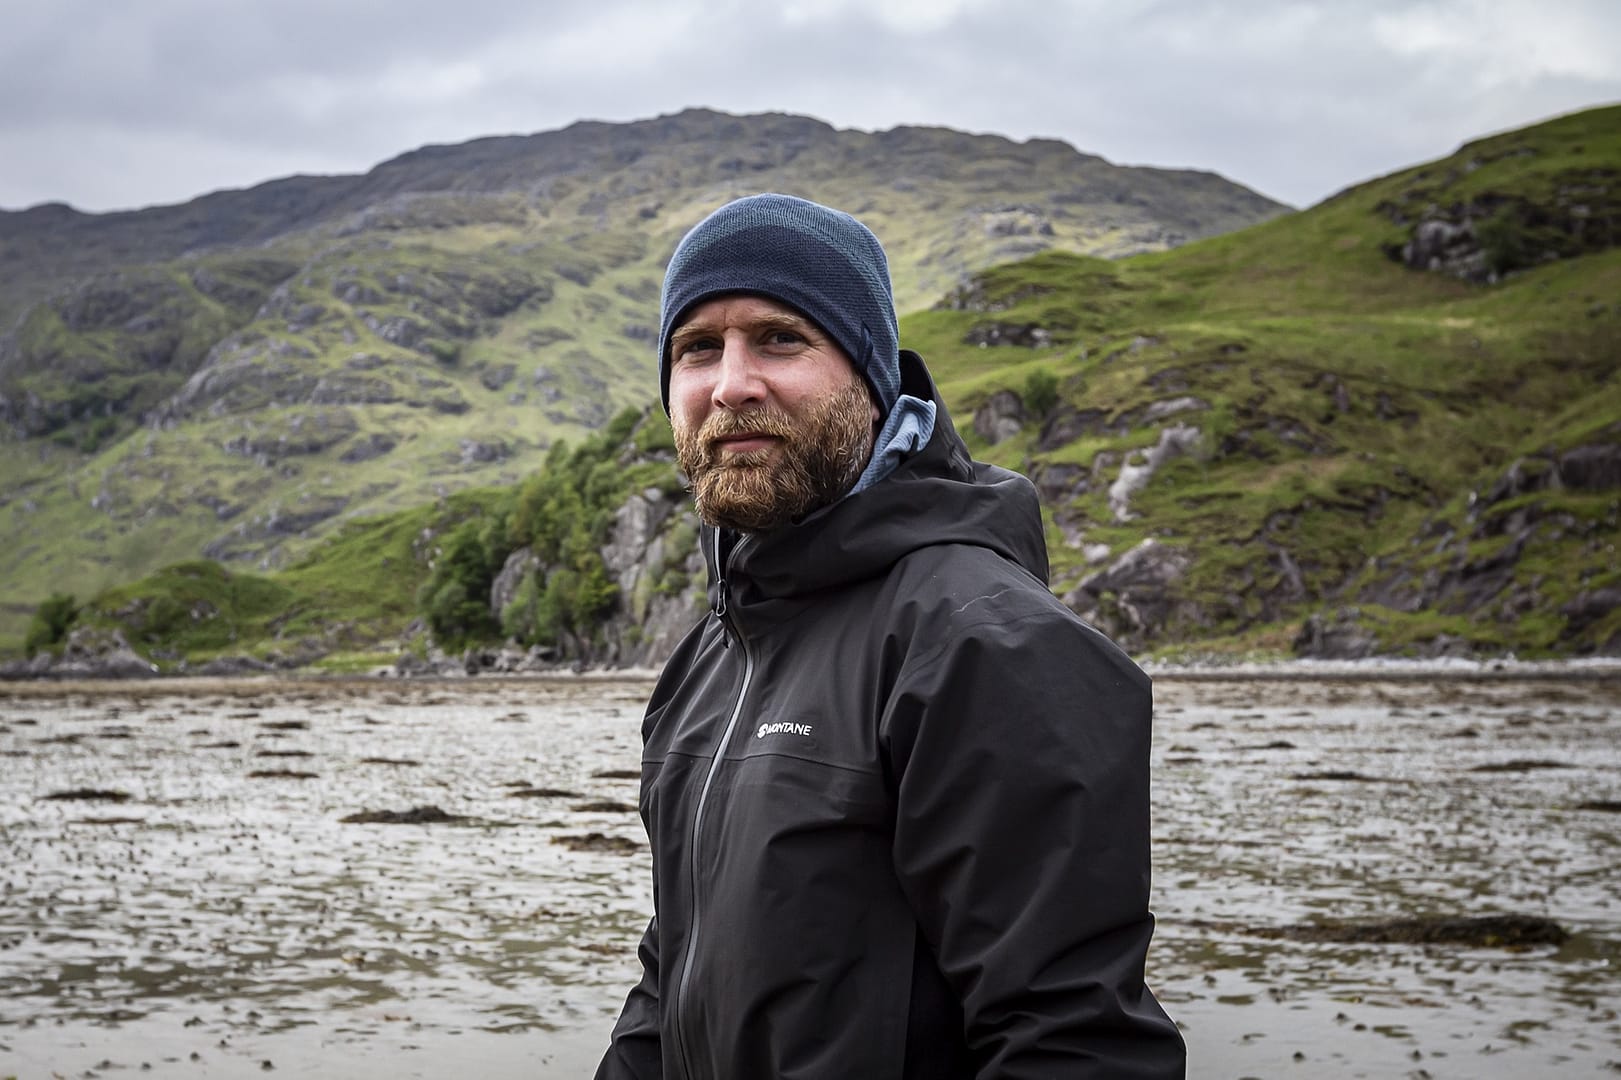 Montane Uses More Responsible Materials In The New Solution Waterproof Jacket